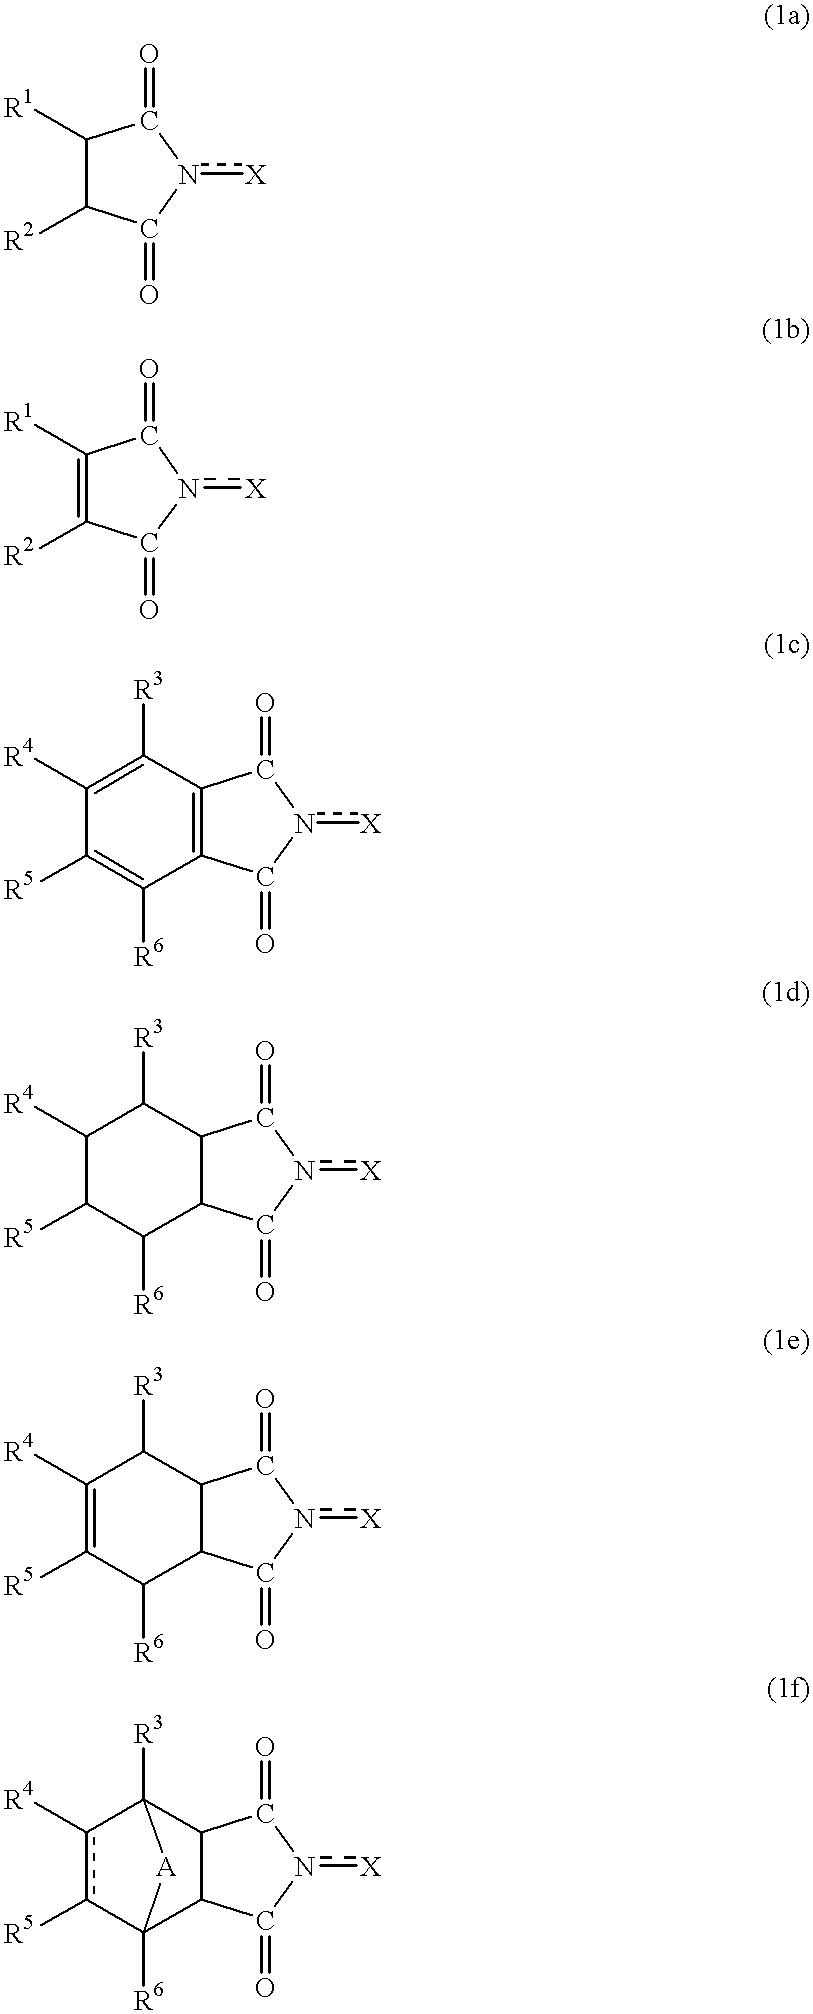 Process for producing hydrogen peroxide